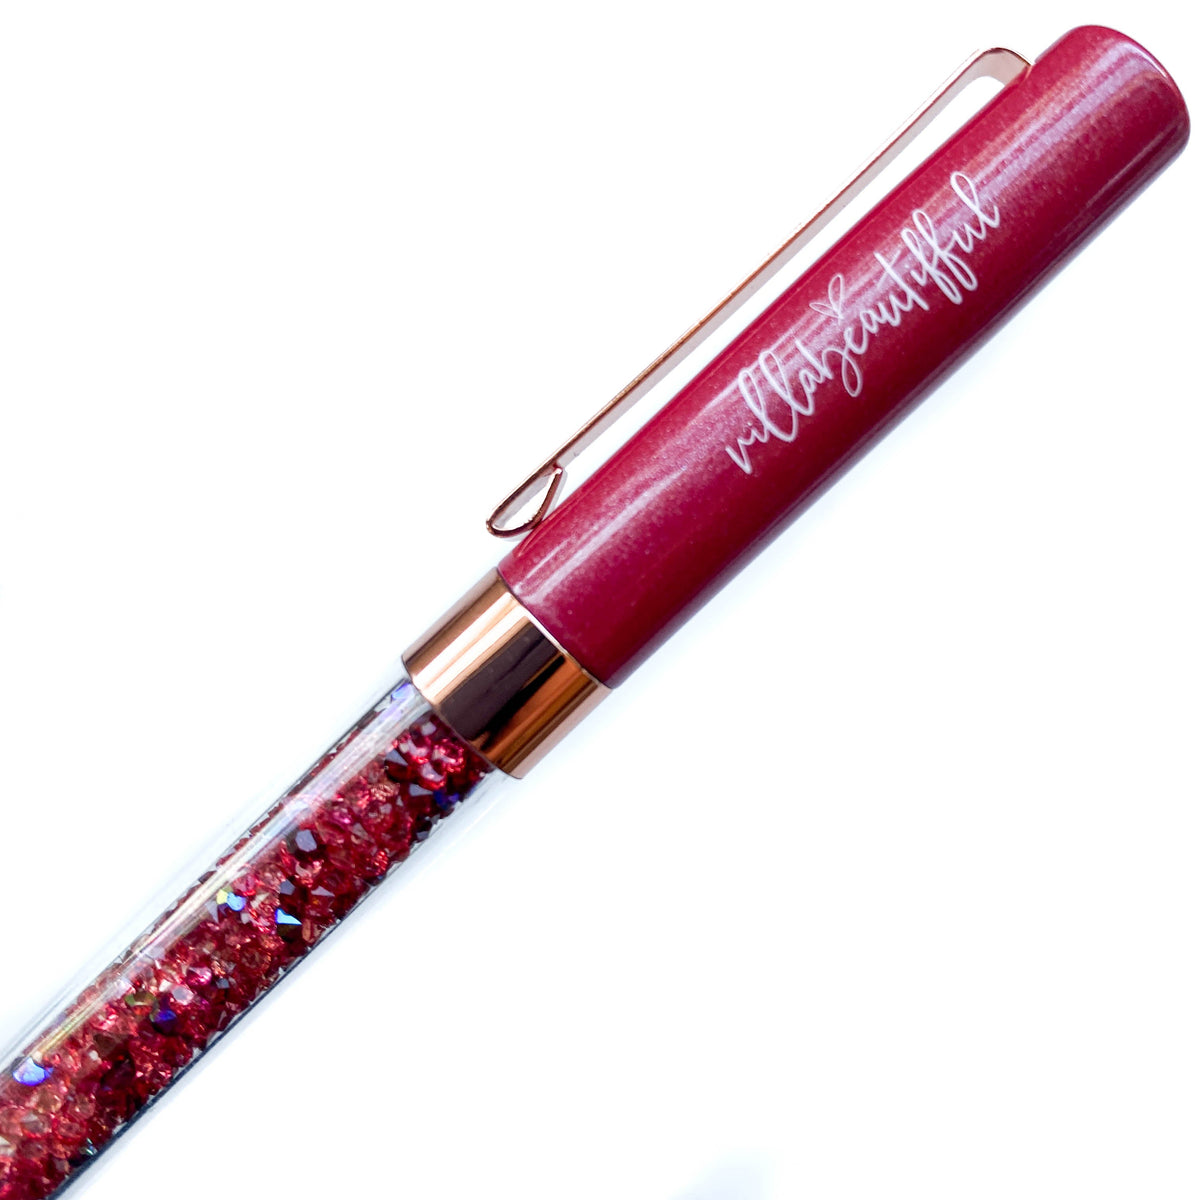 Aries Imperfect Crystal VBPen | limited pen